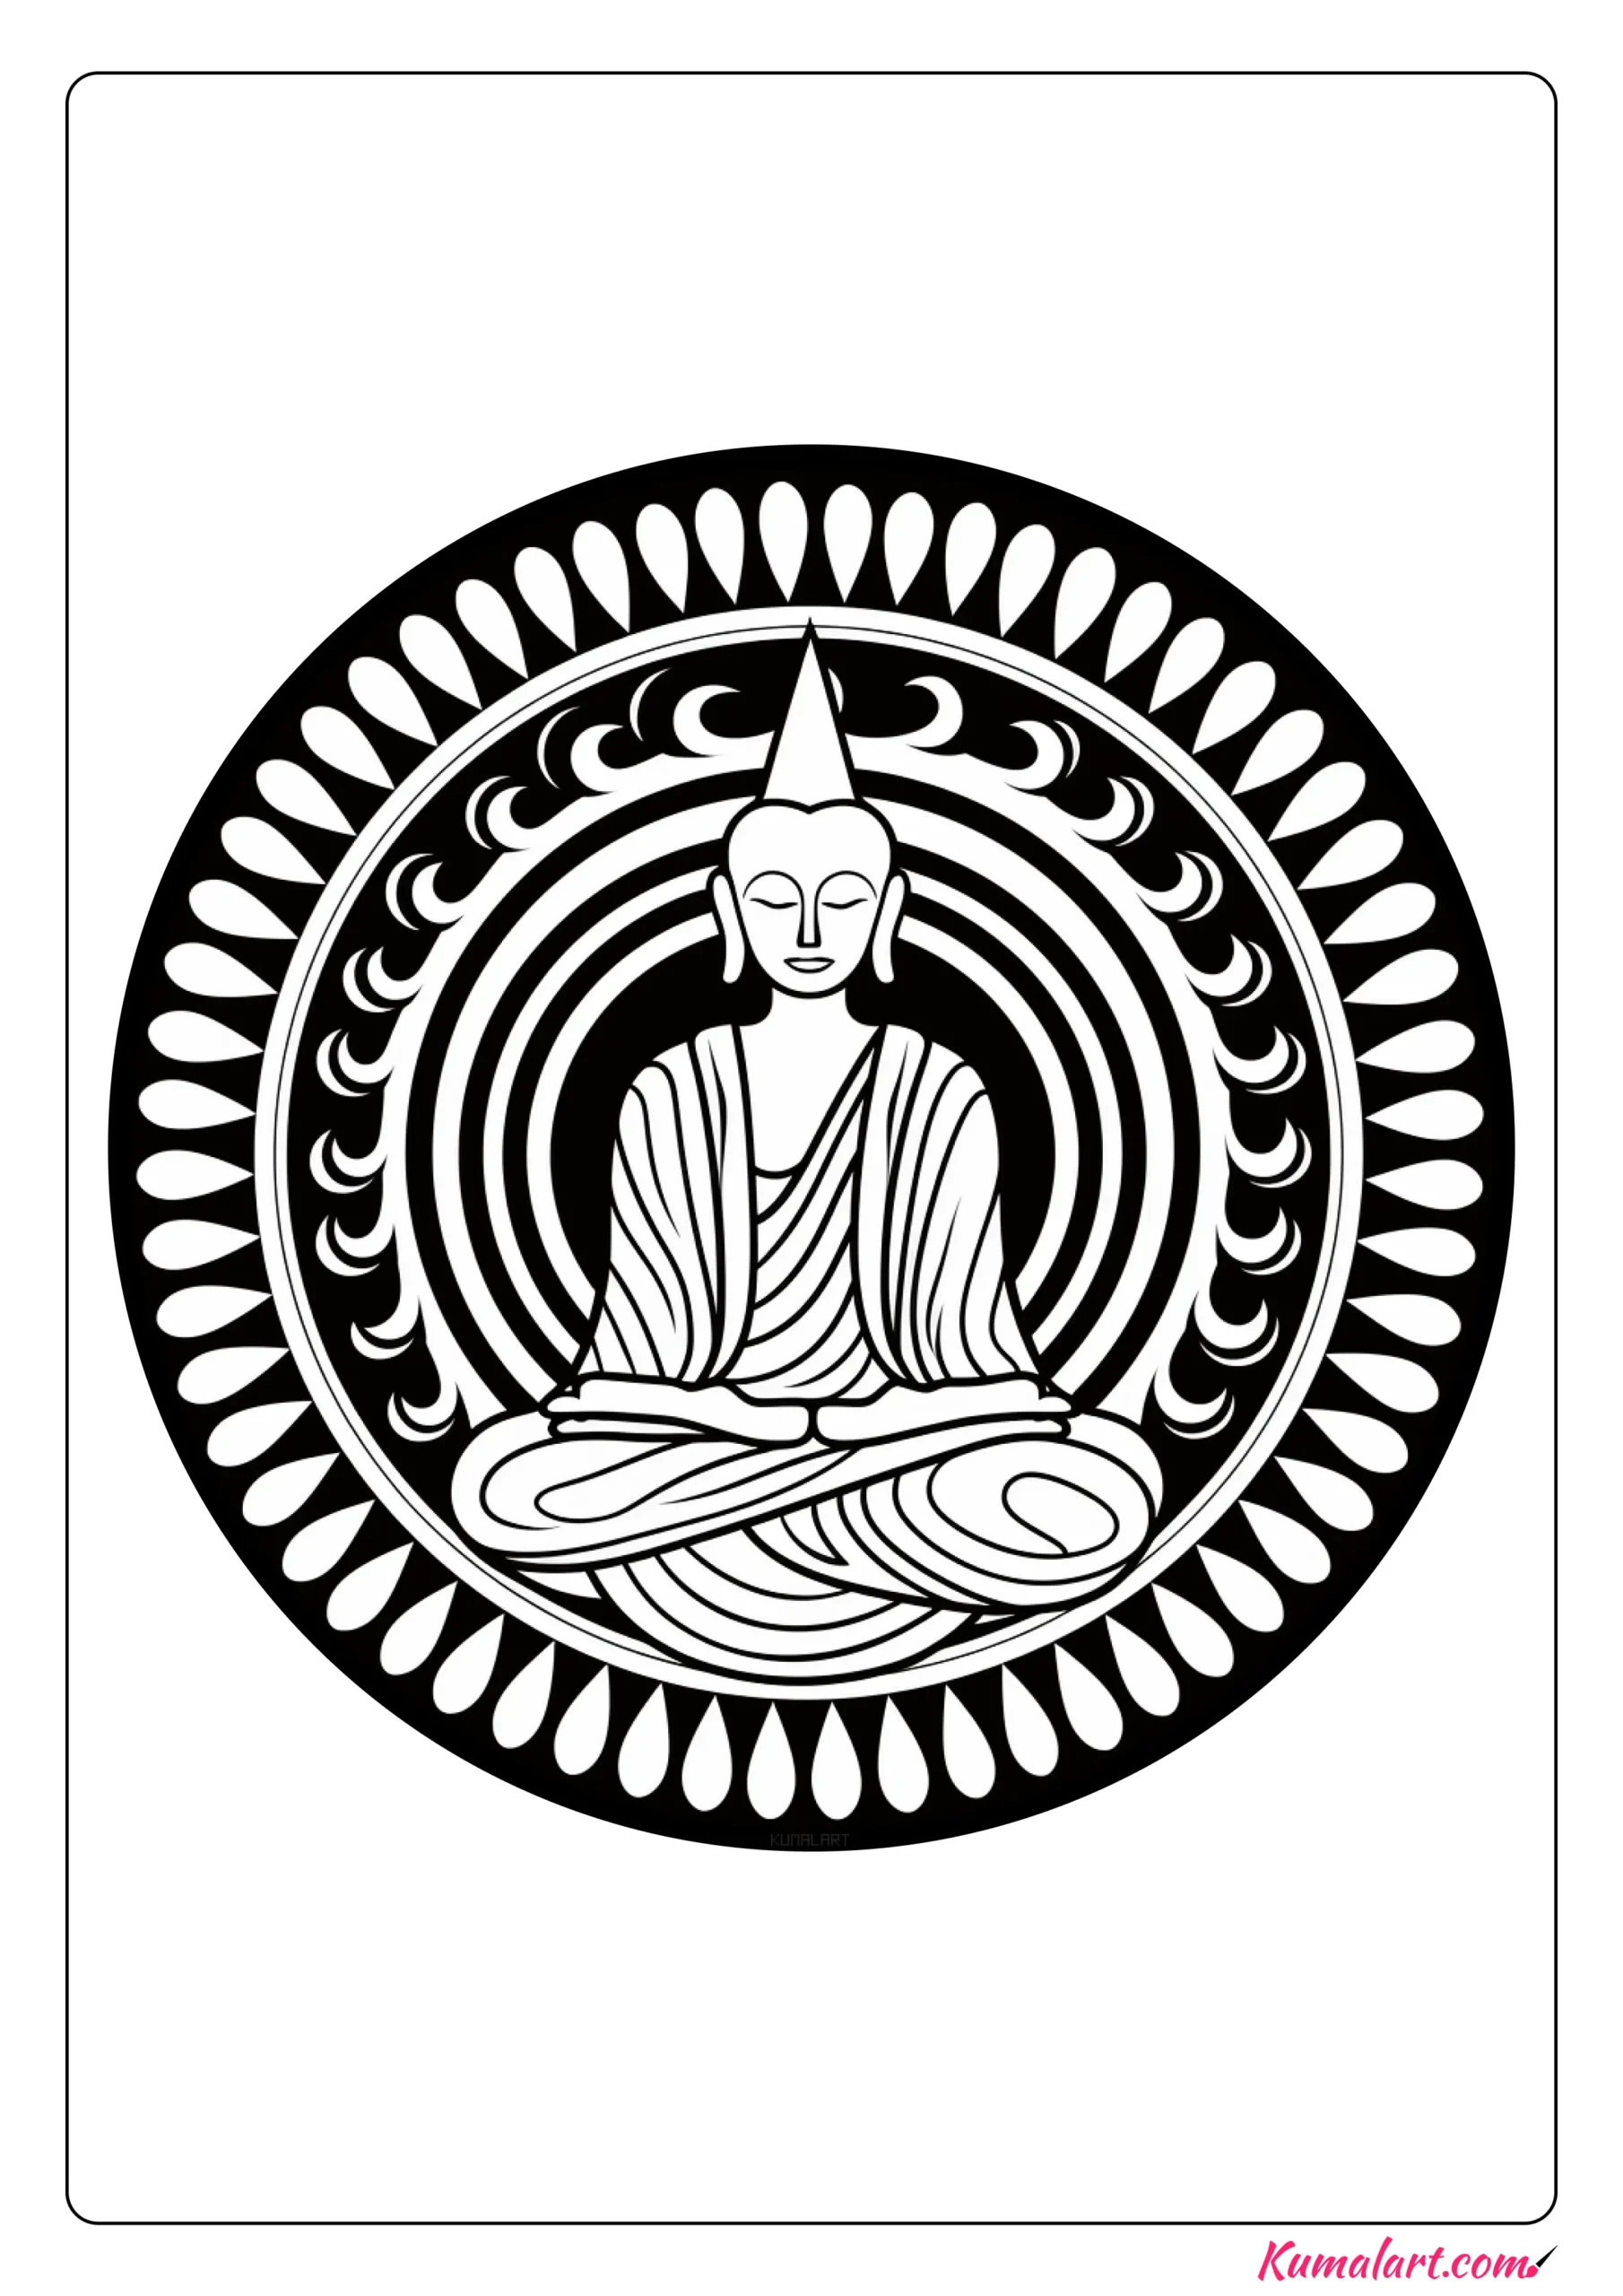 Humble Buddhist Coloring Page